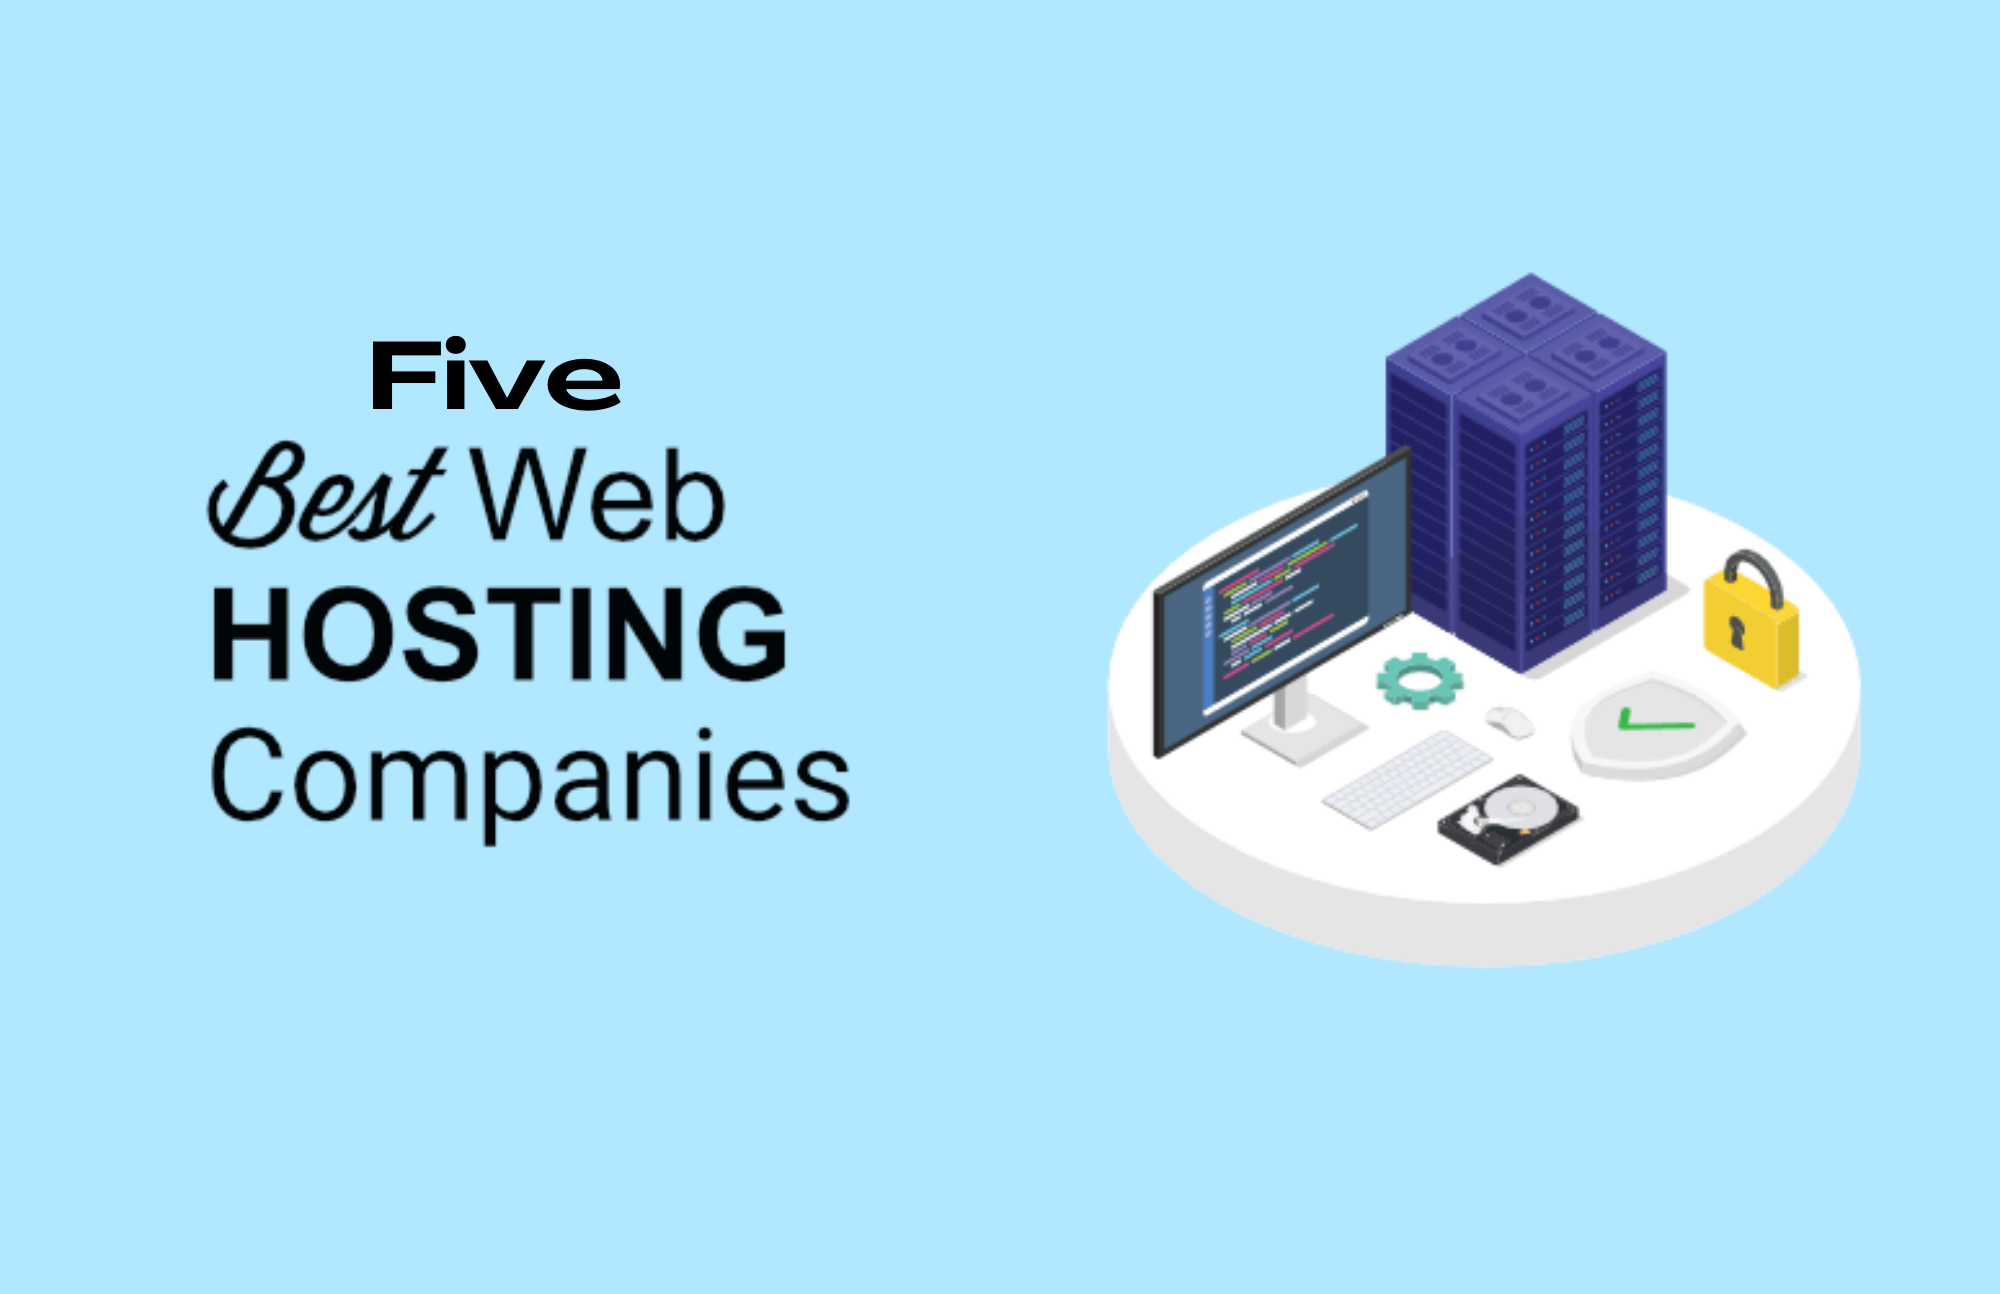 5 Web Hosting Companies - Finding The Best One With These Active Service Providers